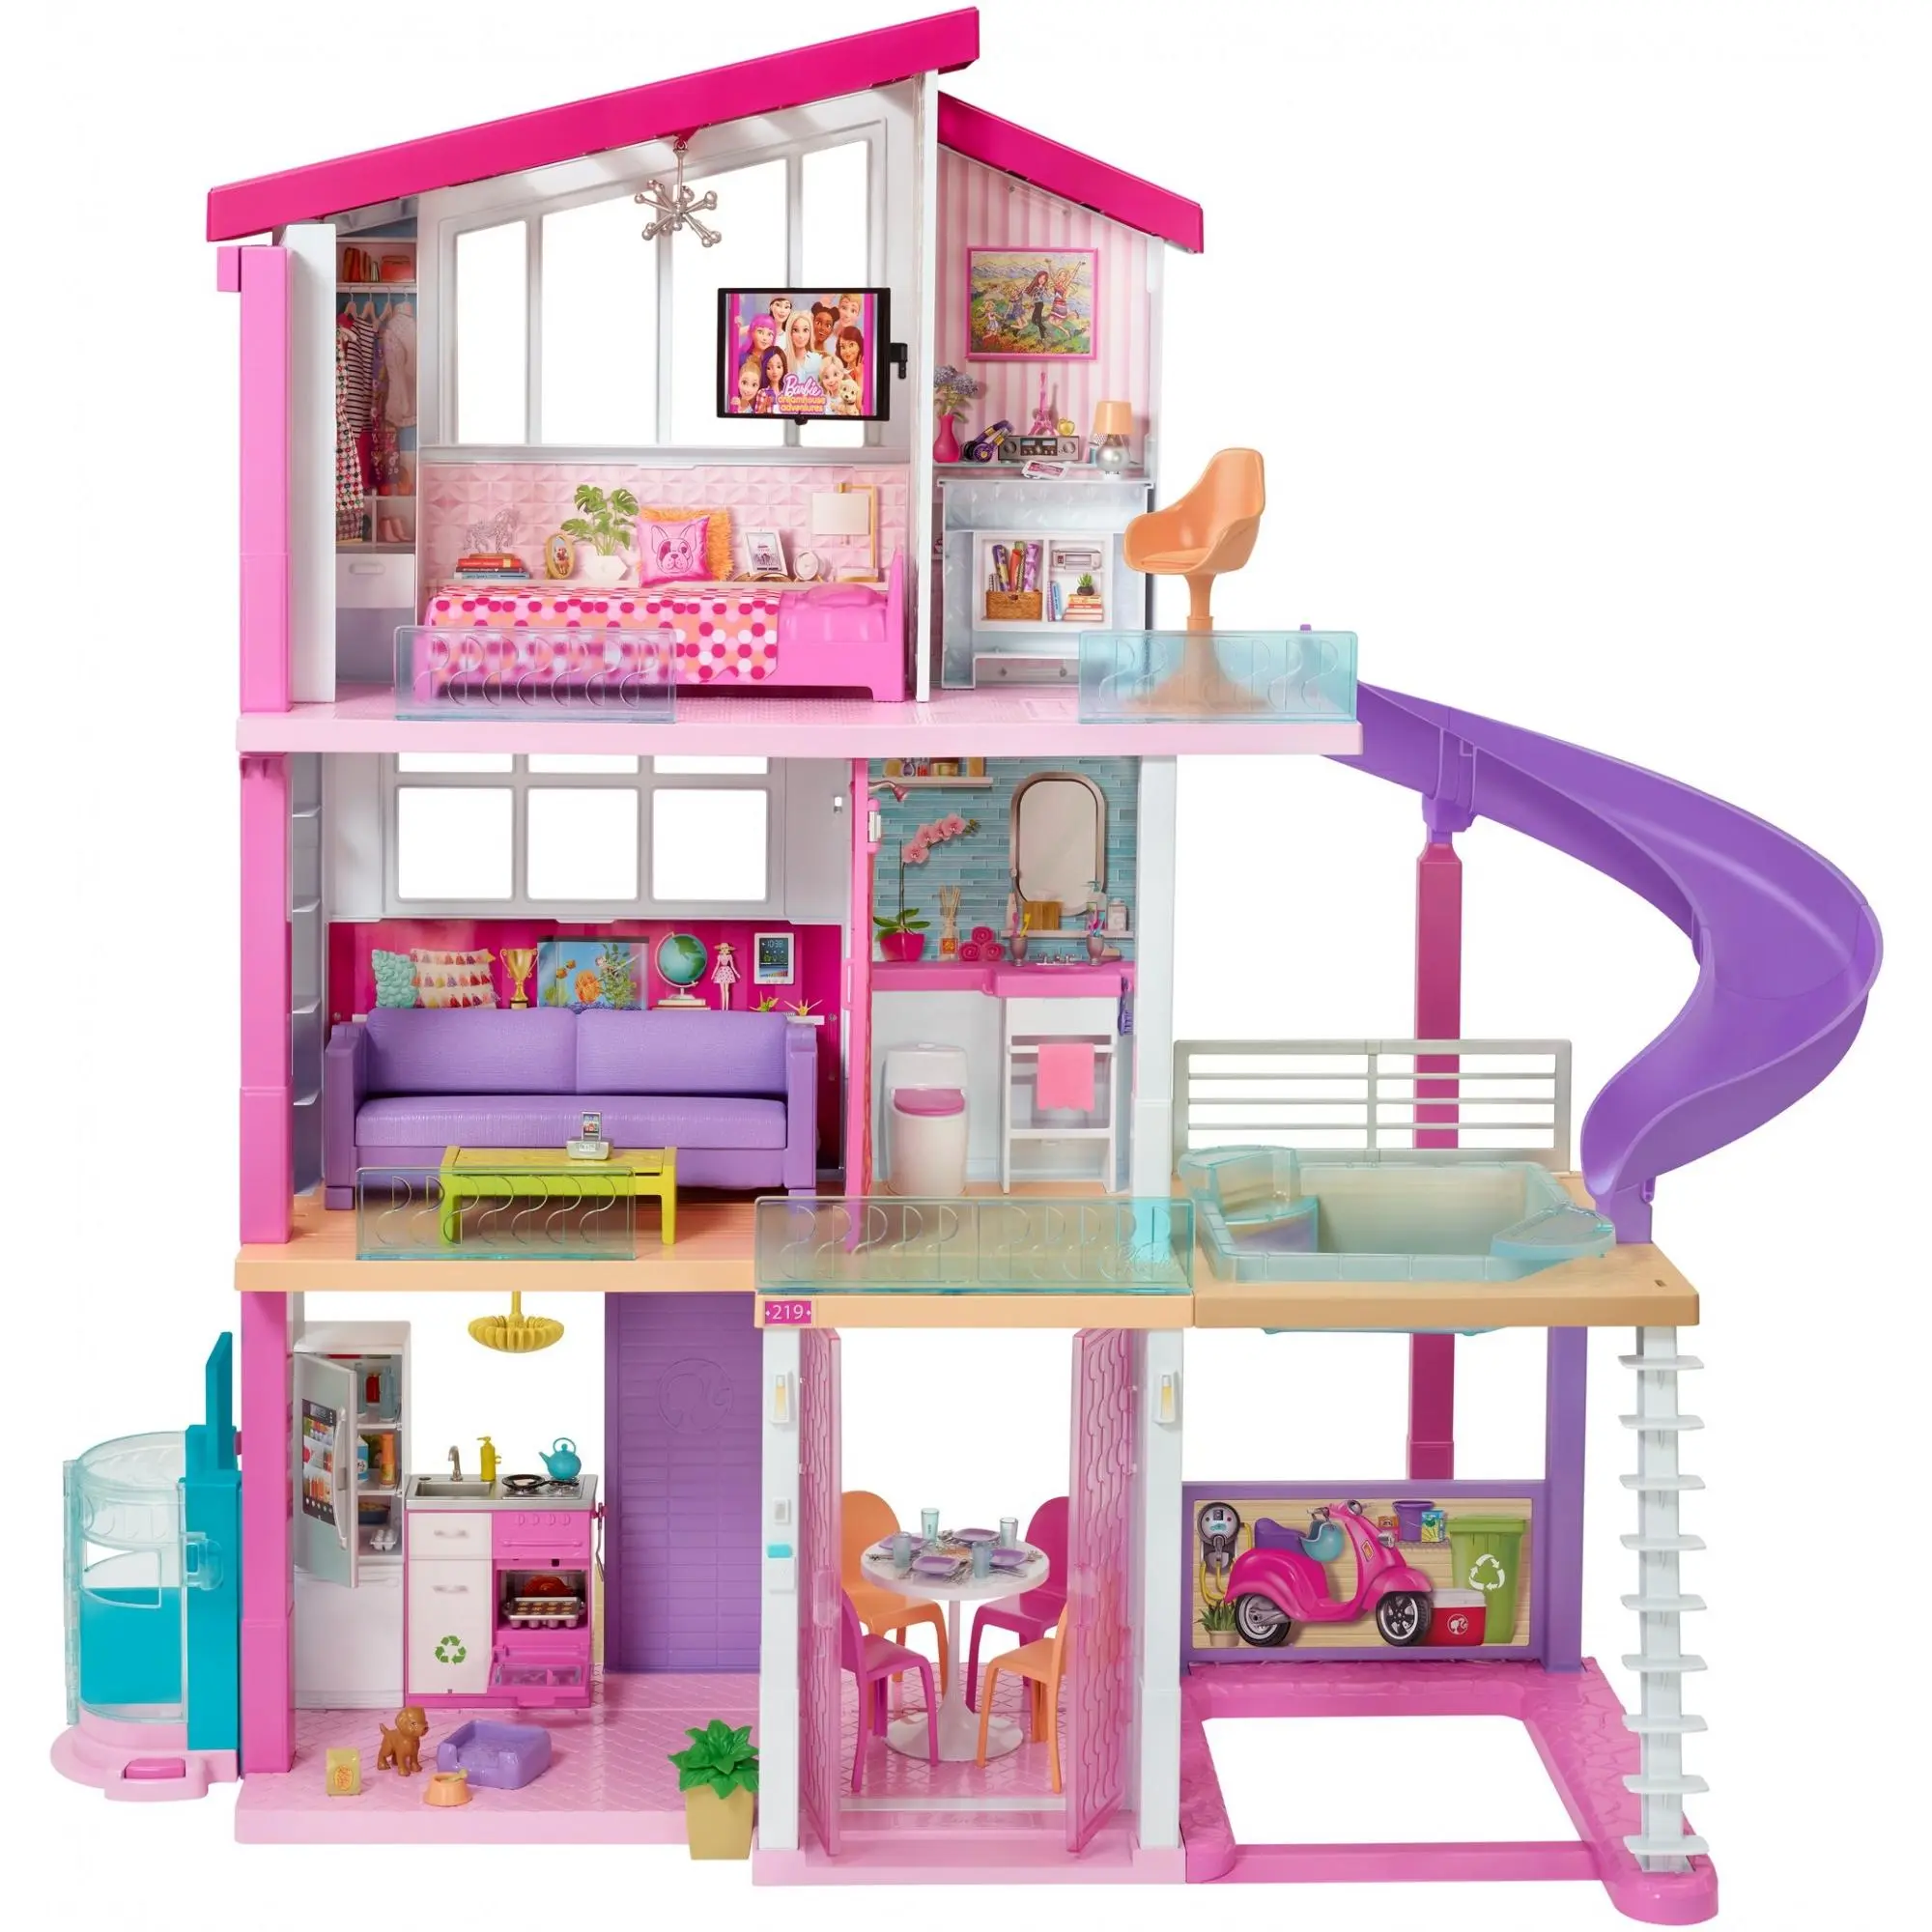 Barbie Malibu Dreamhouse is listed on Airbnb for $60 a night